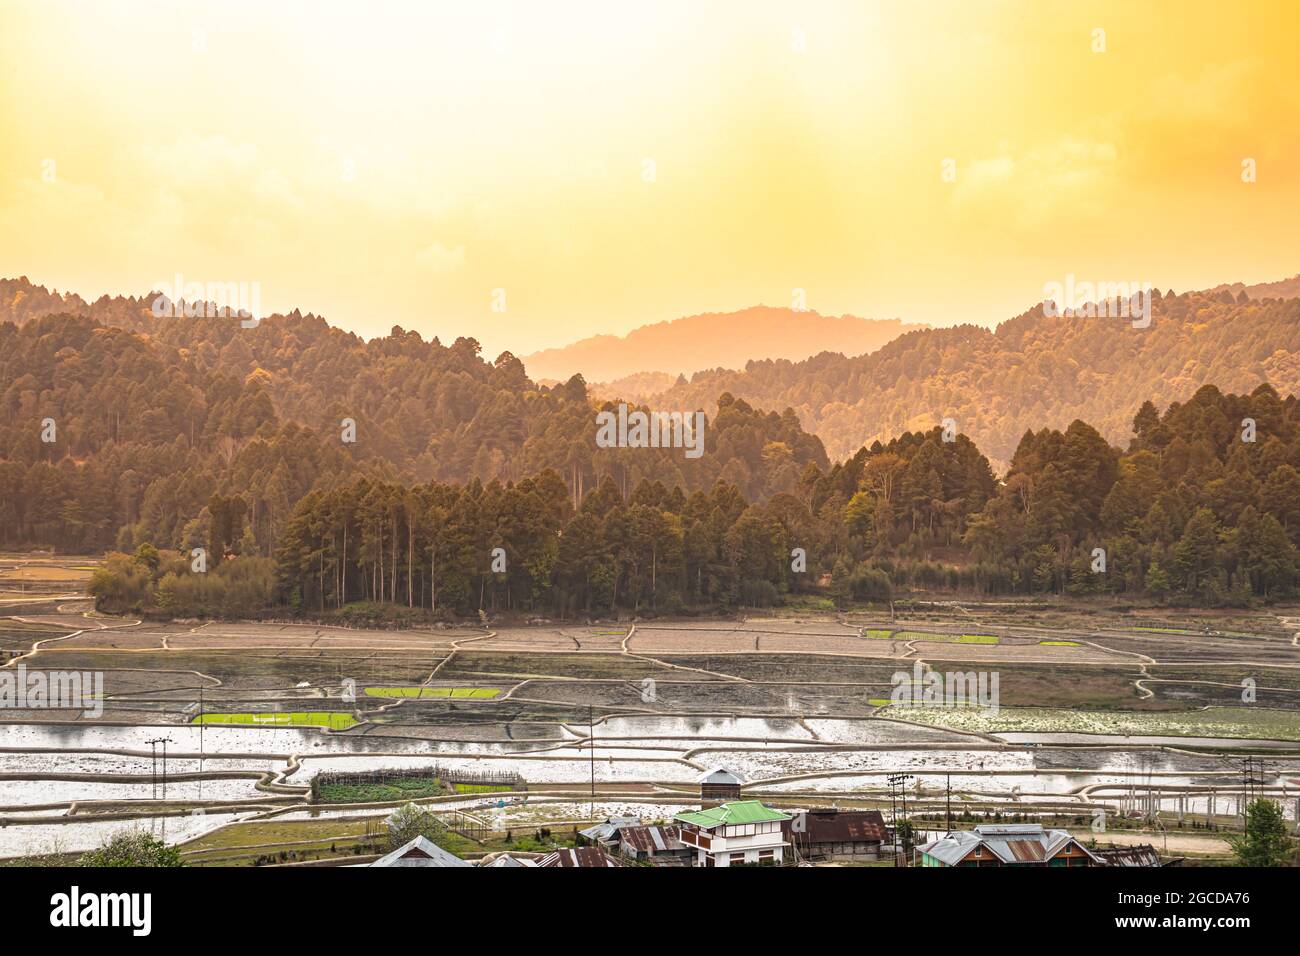 country side paddy fields and village with mountain backdrop at morning image is taken at ziro arunachal pradesh india. Stock Photo